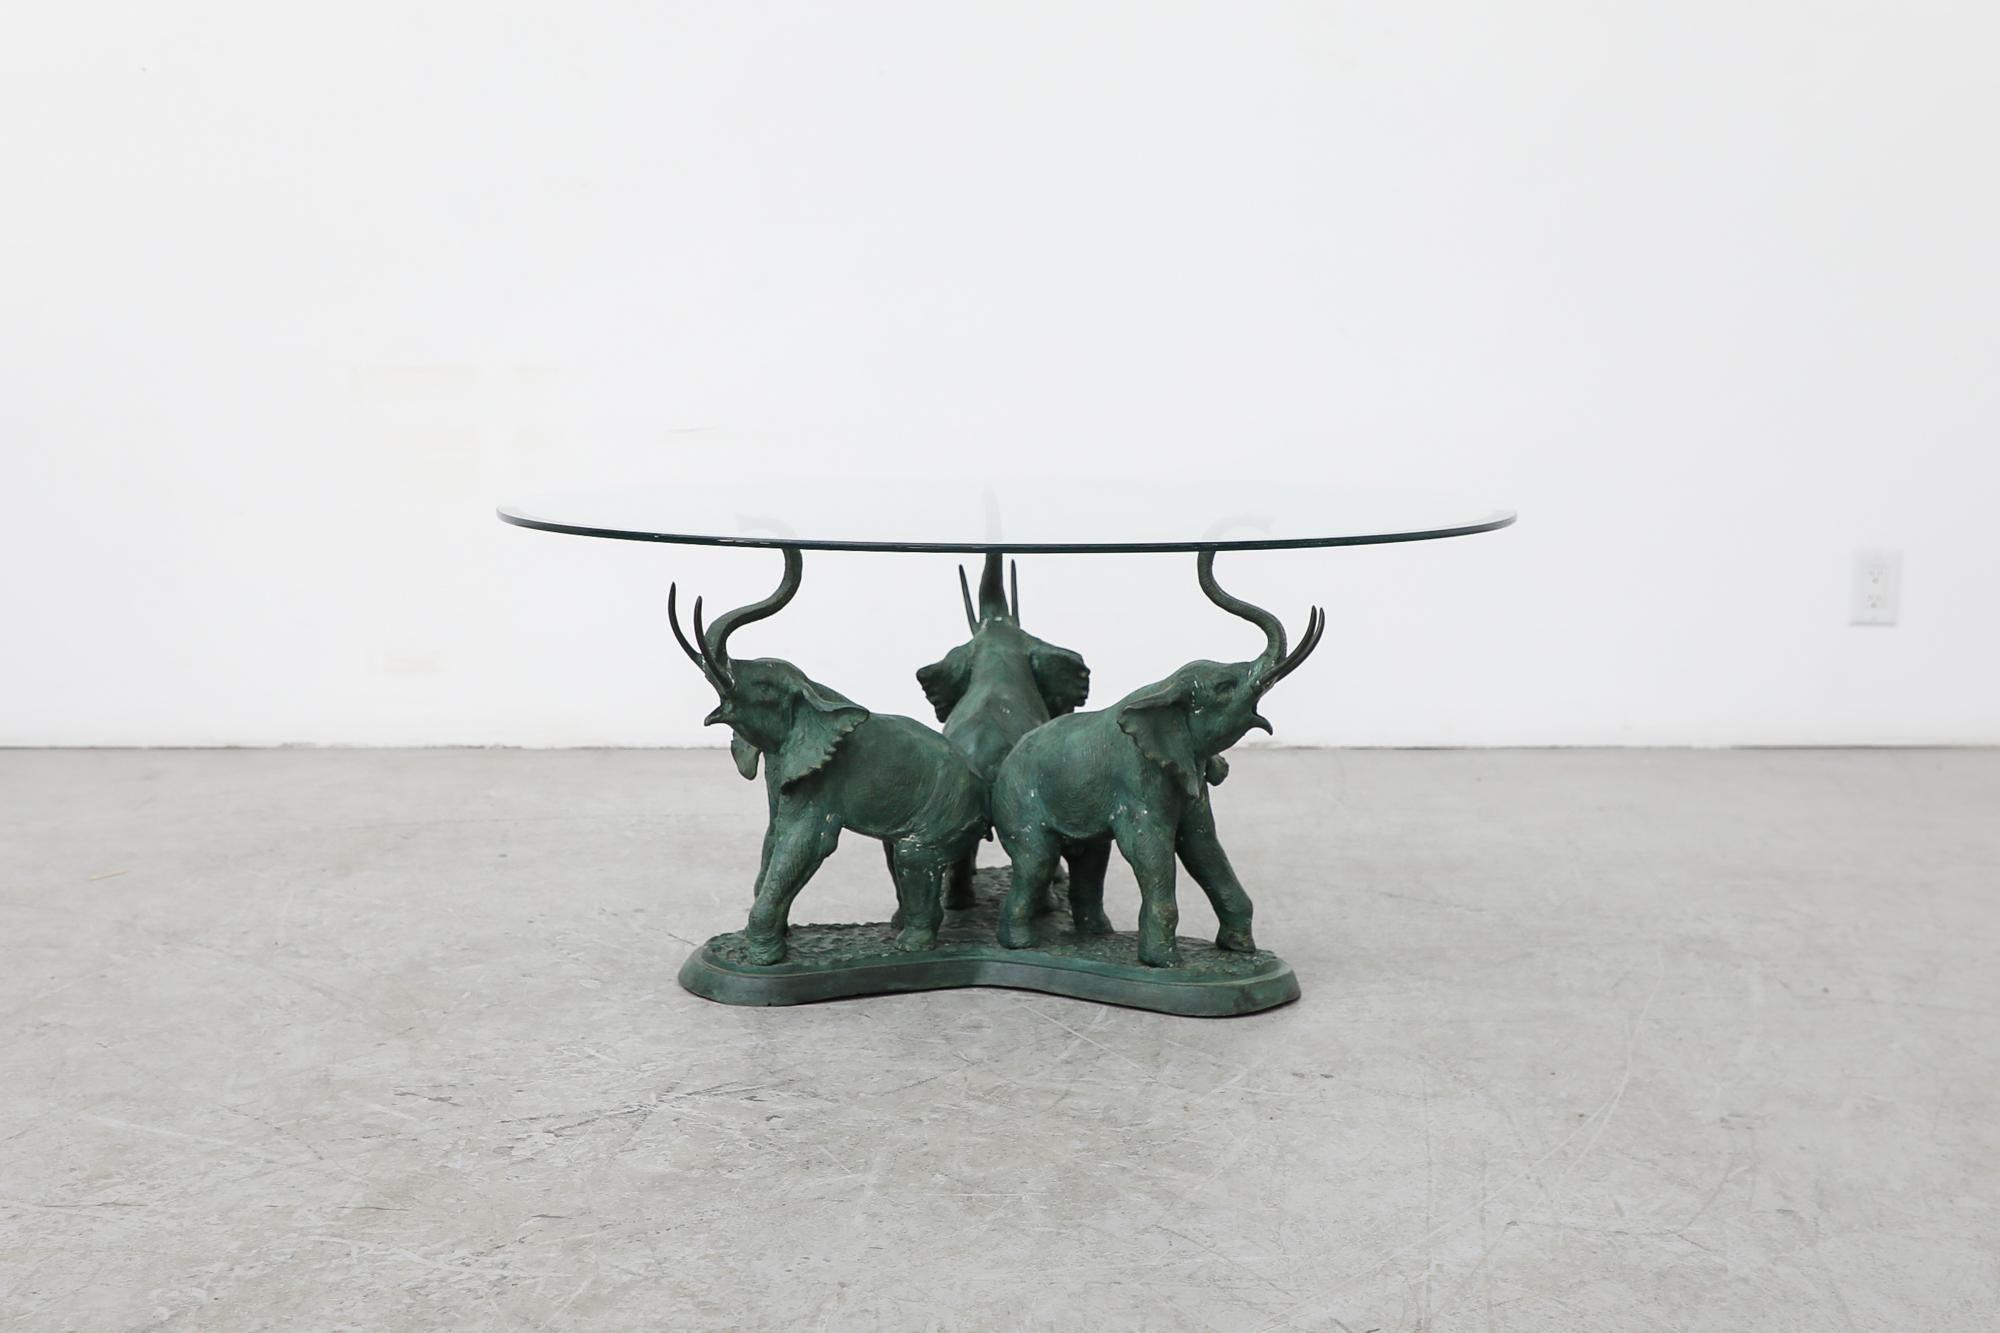 Heavy, 1970s glass coffee table with decorative elephant sculpture base. In original condition with beautiful, heavy patina on the elephants, consistent with their age and use. Another sculptural coffee table is available and listed separately